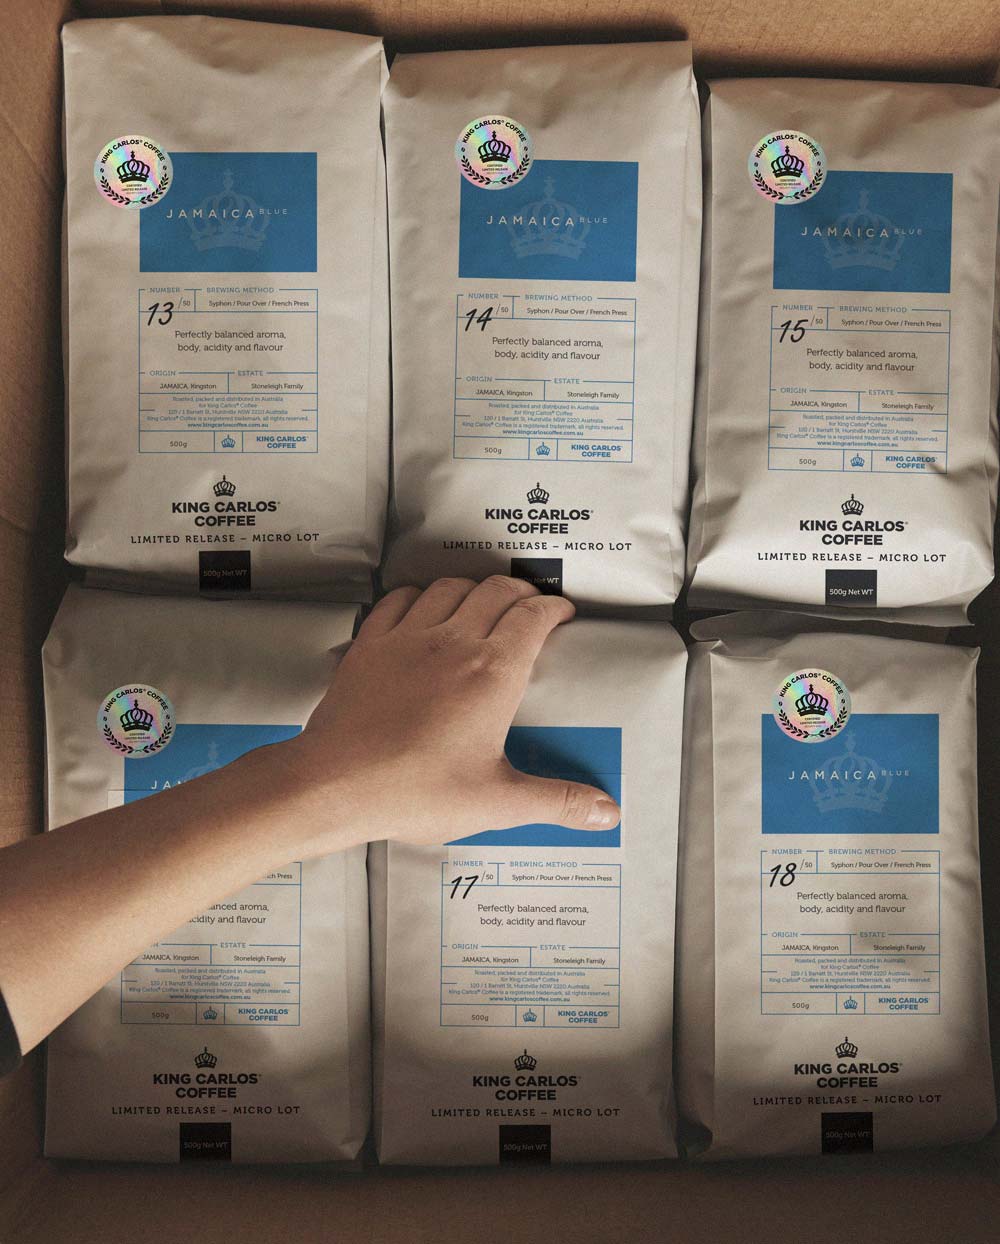 What makes Jamaica Blue Mountain Coffee different?